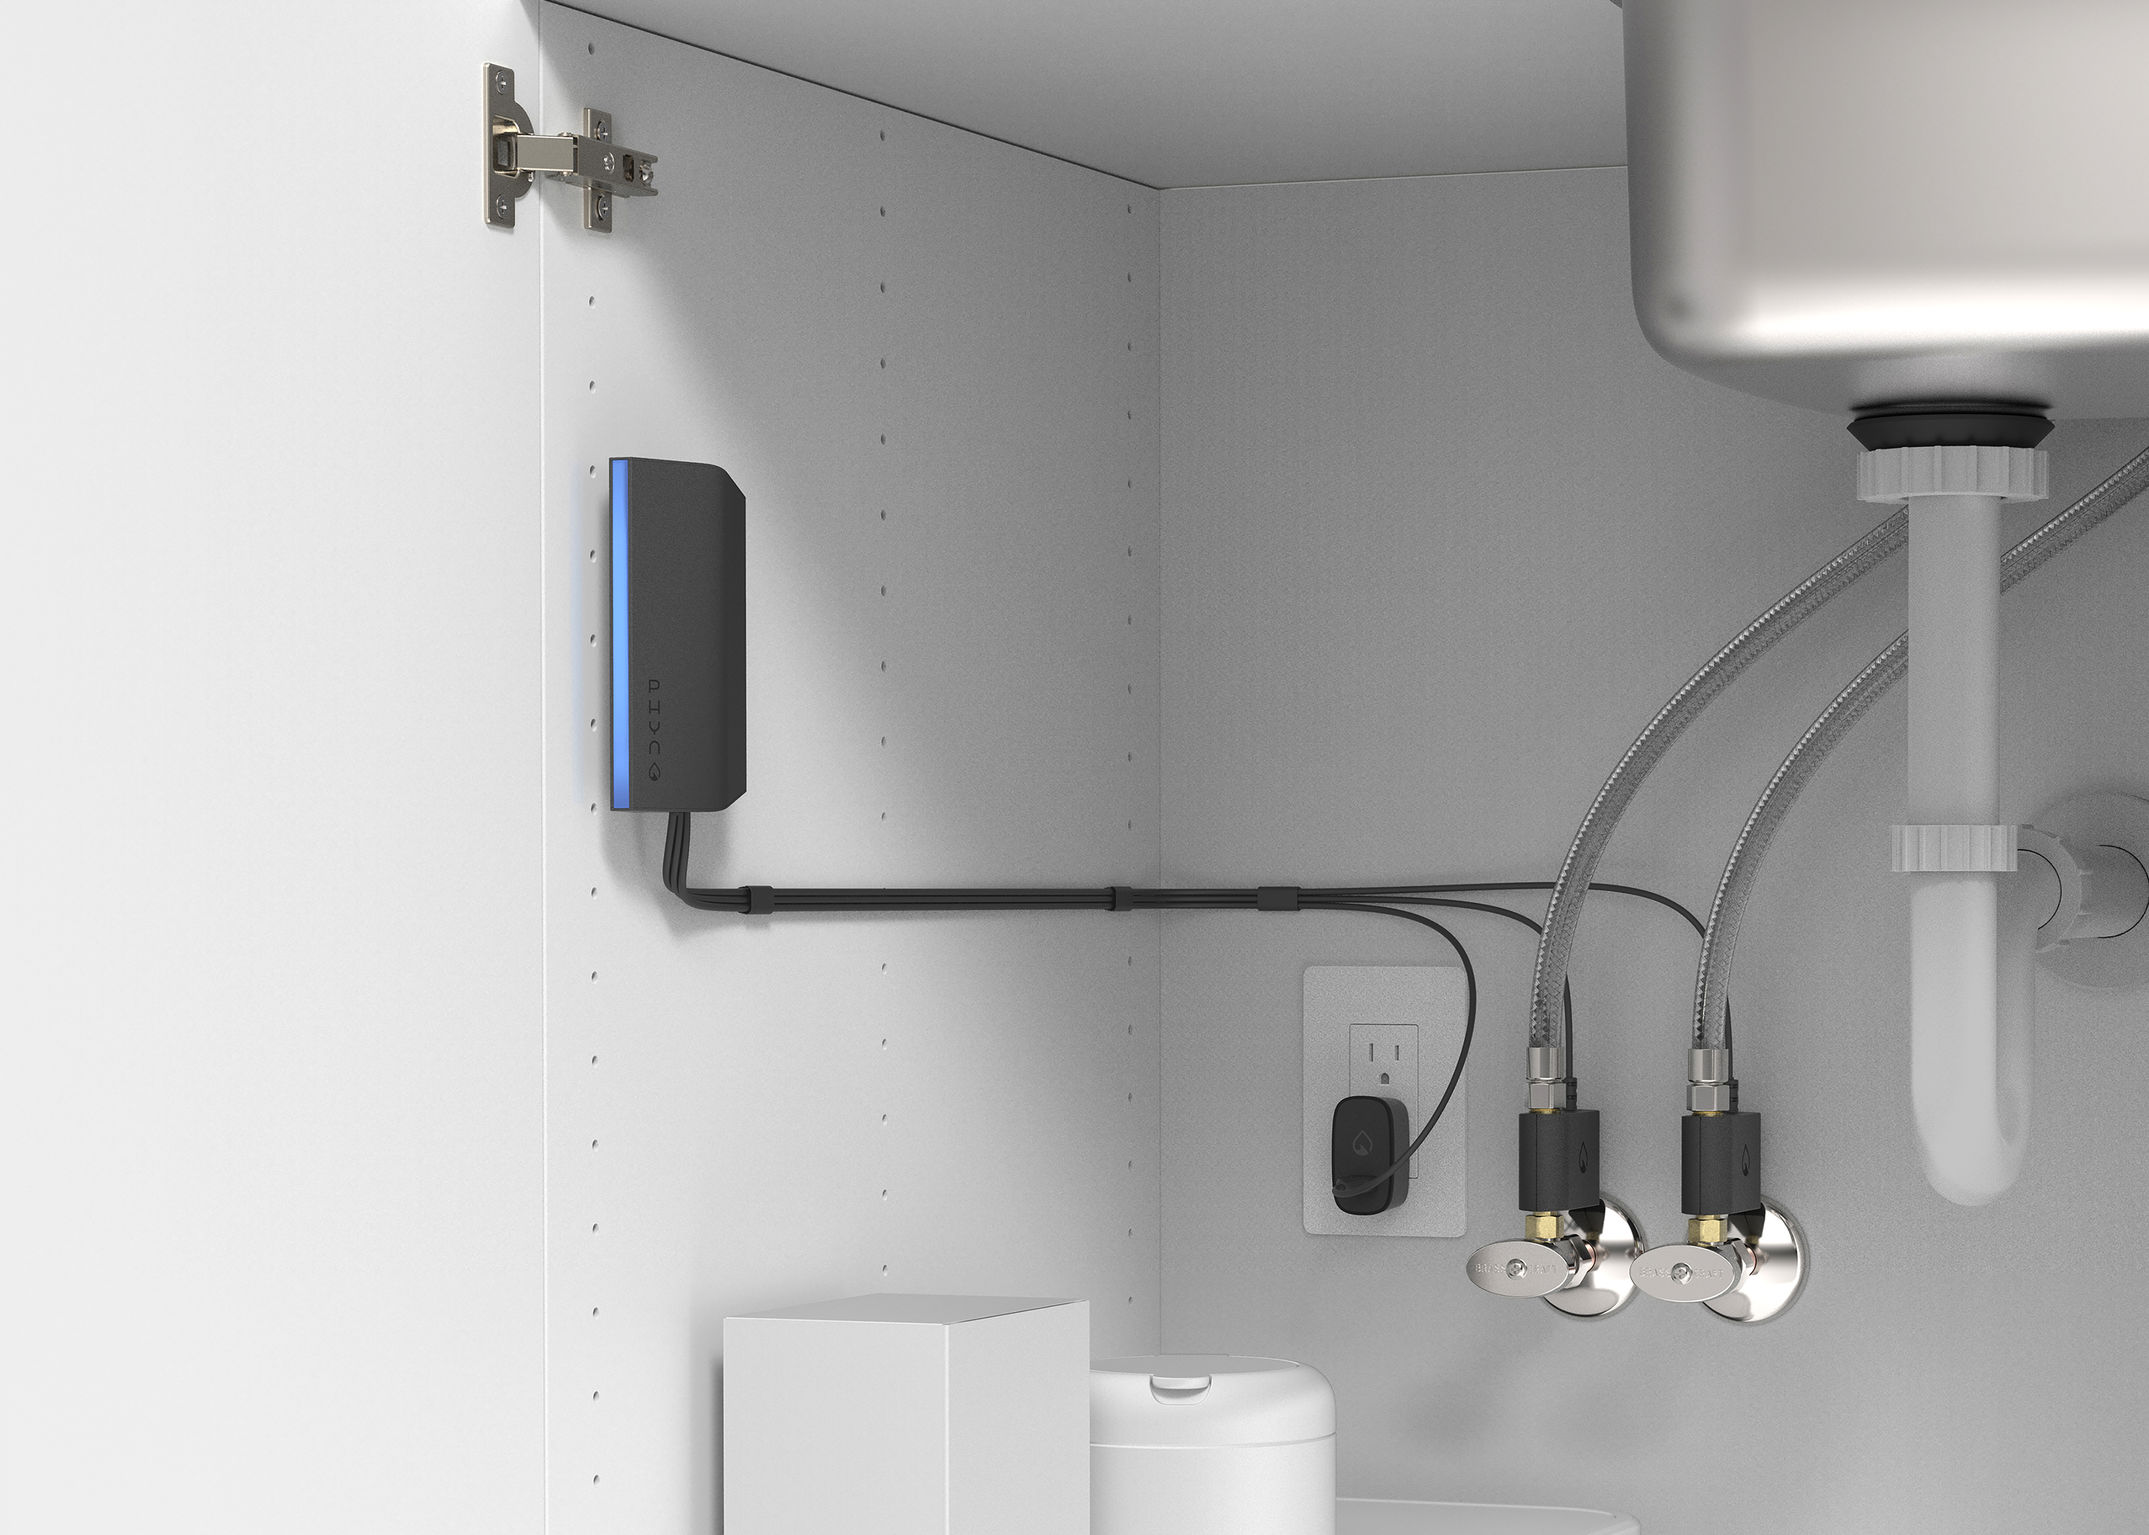 Phyn Smart Water Assistant